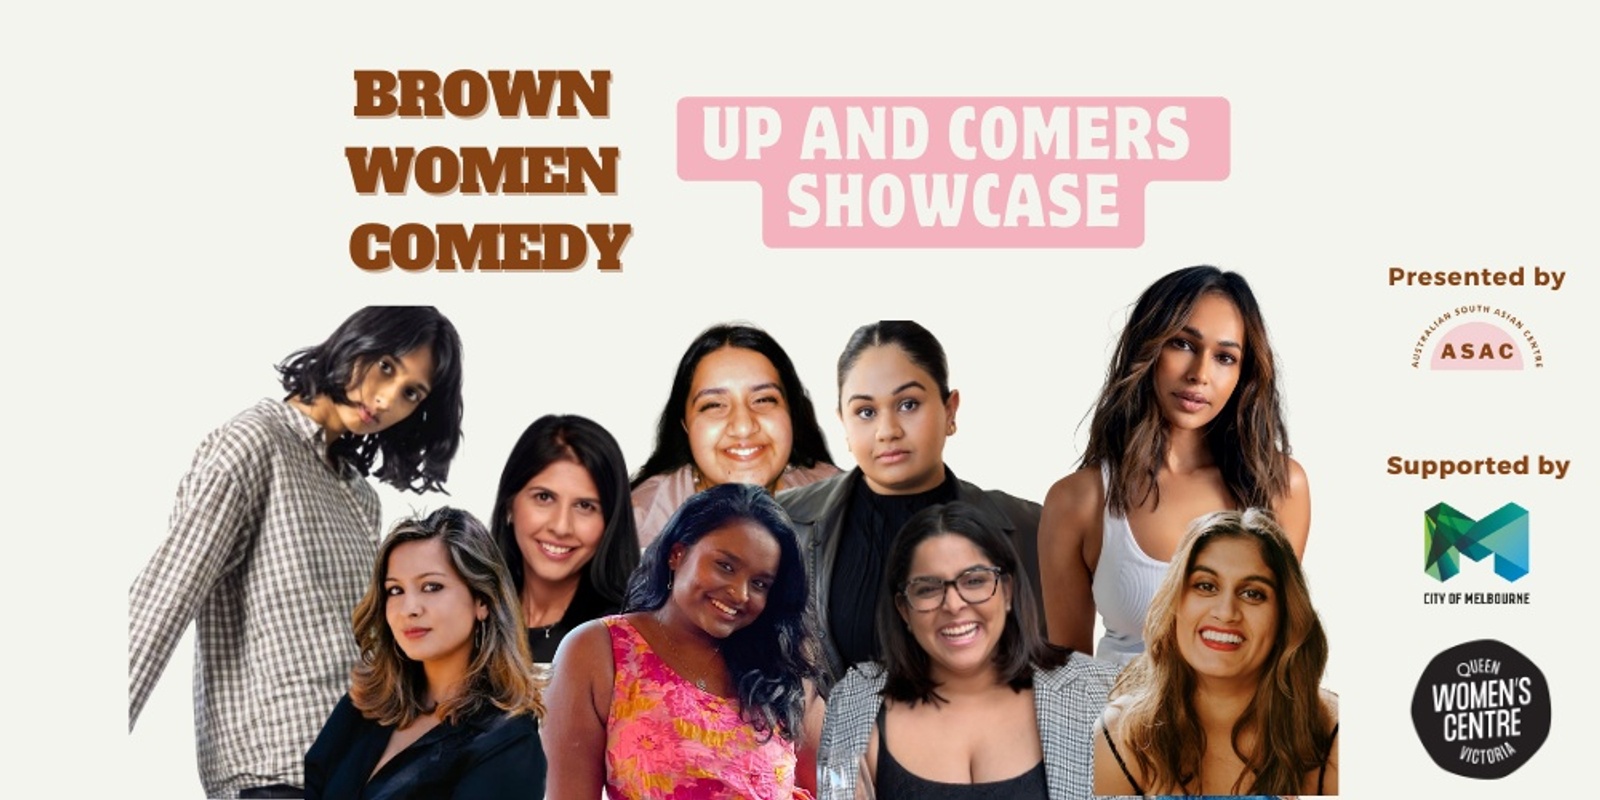 Banner image for Brown Women Comedy: Up-and-Comers Showcase